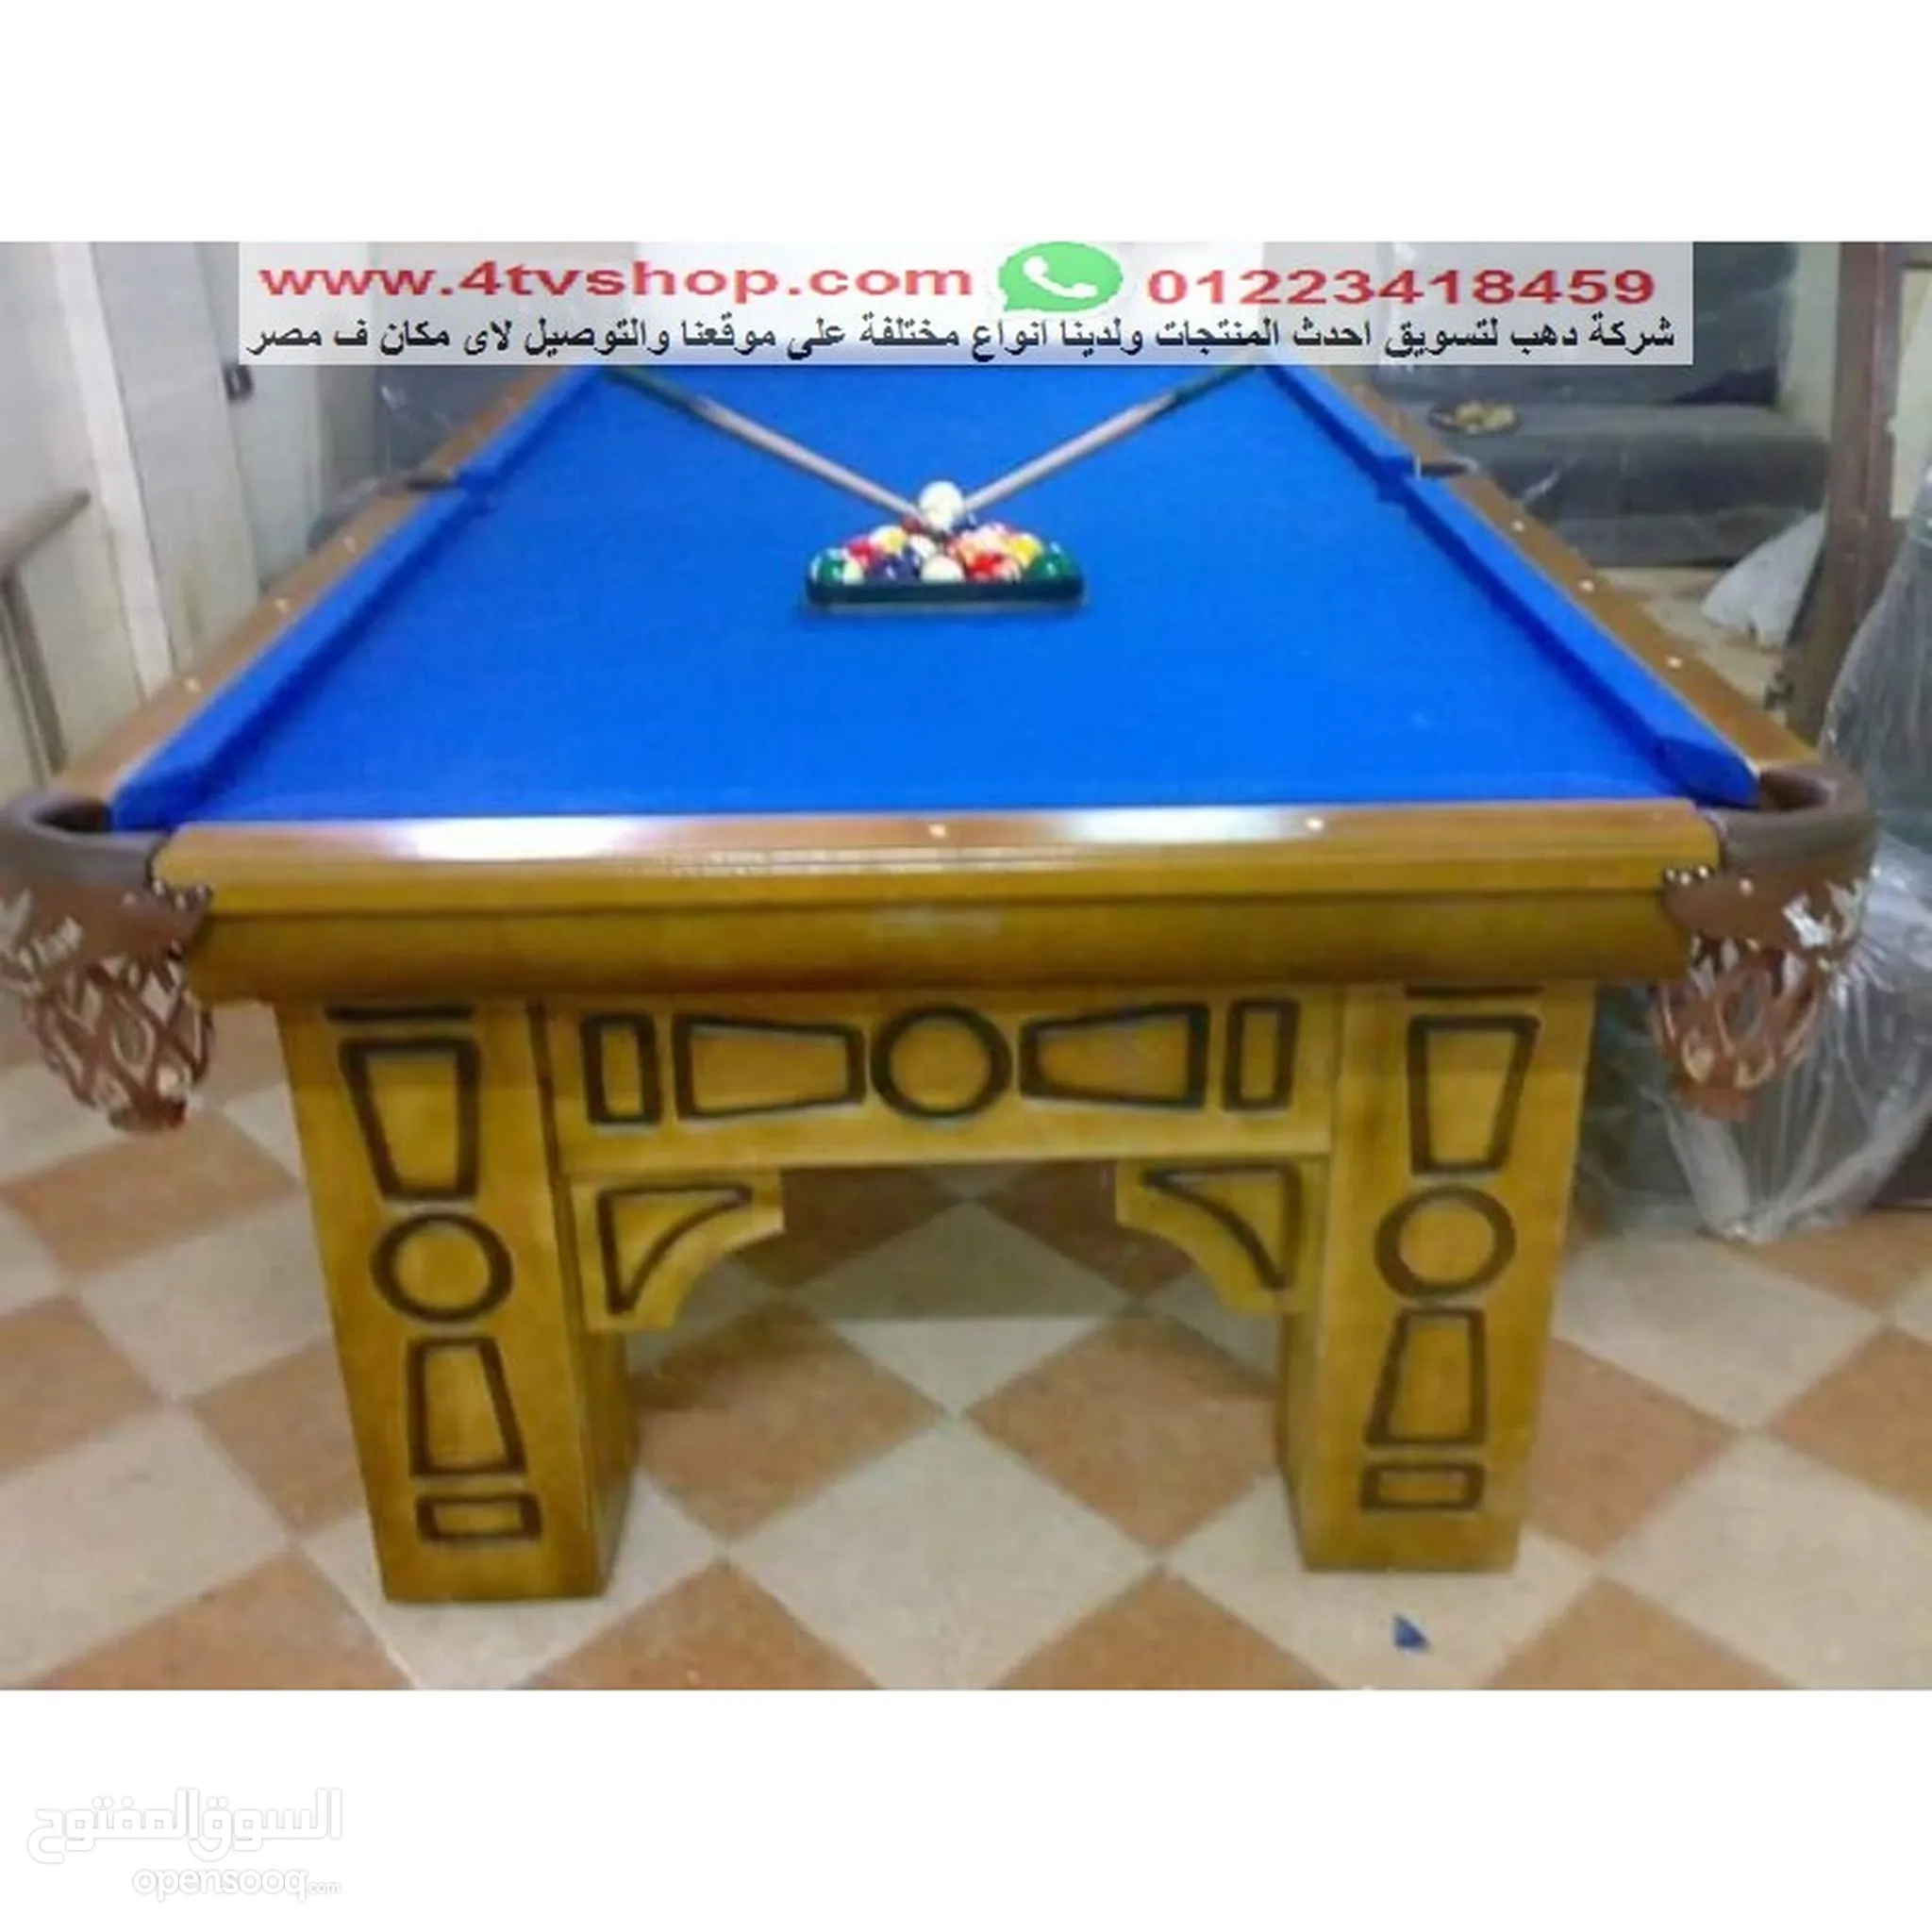 Billiard & Snooker for Sale in Egypt : Best Prices | OpenSooq